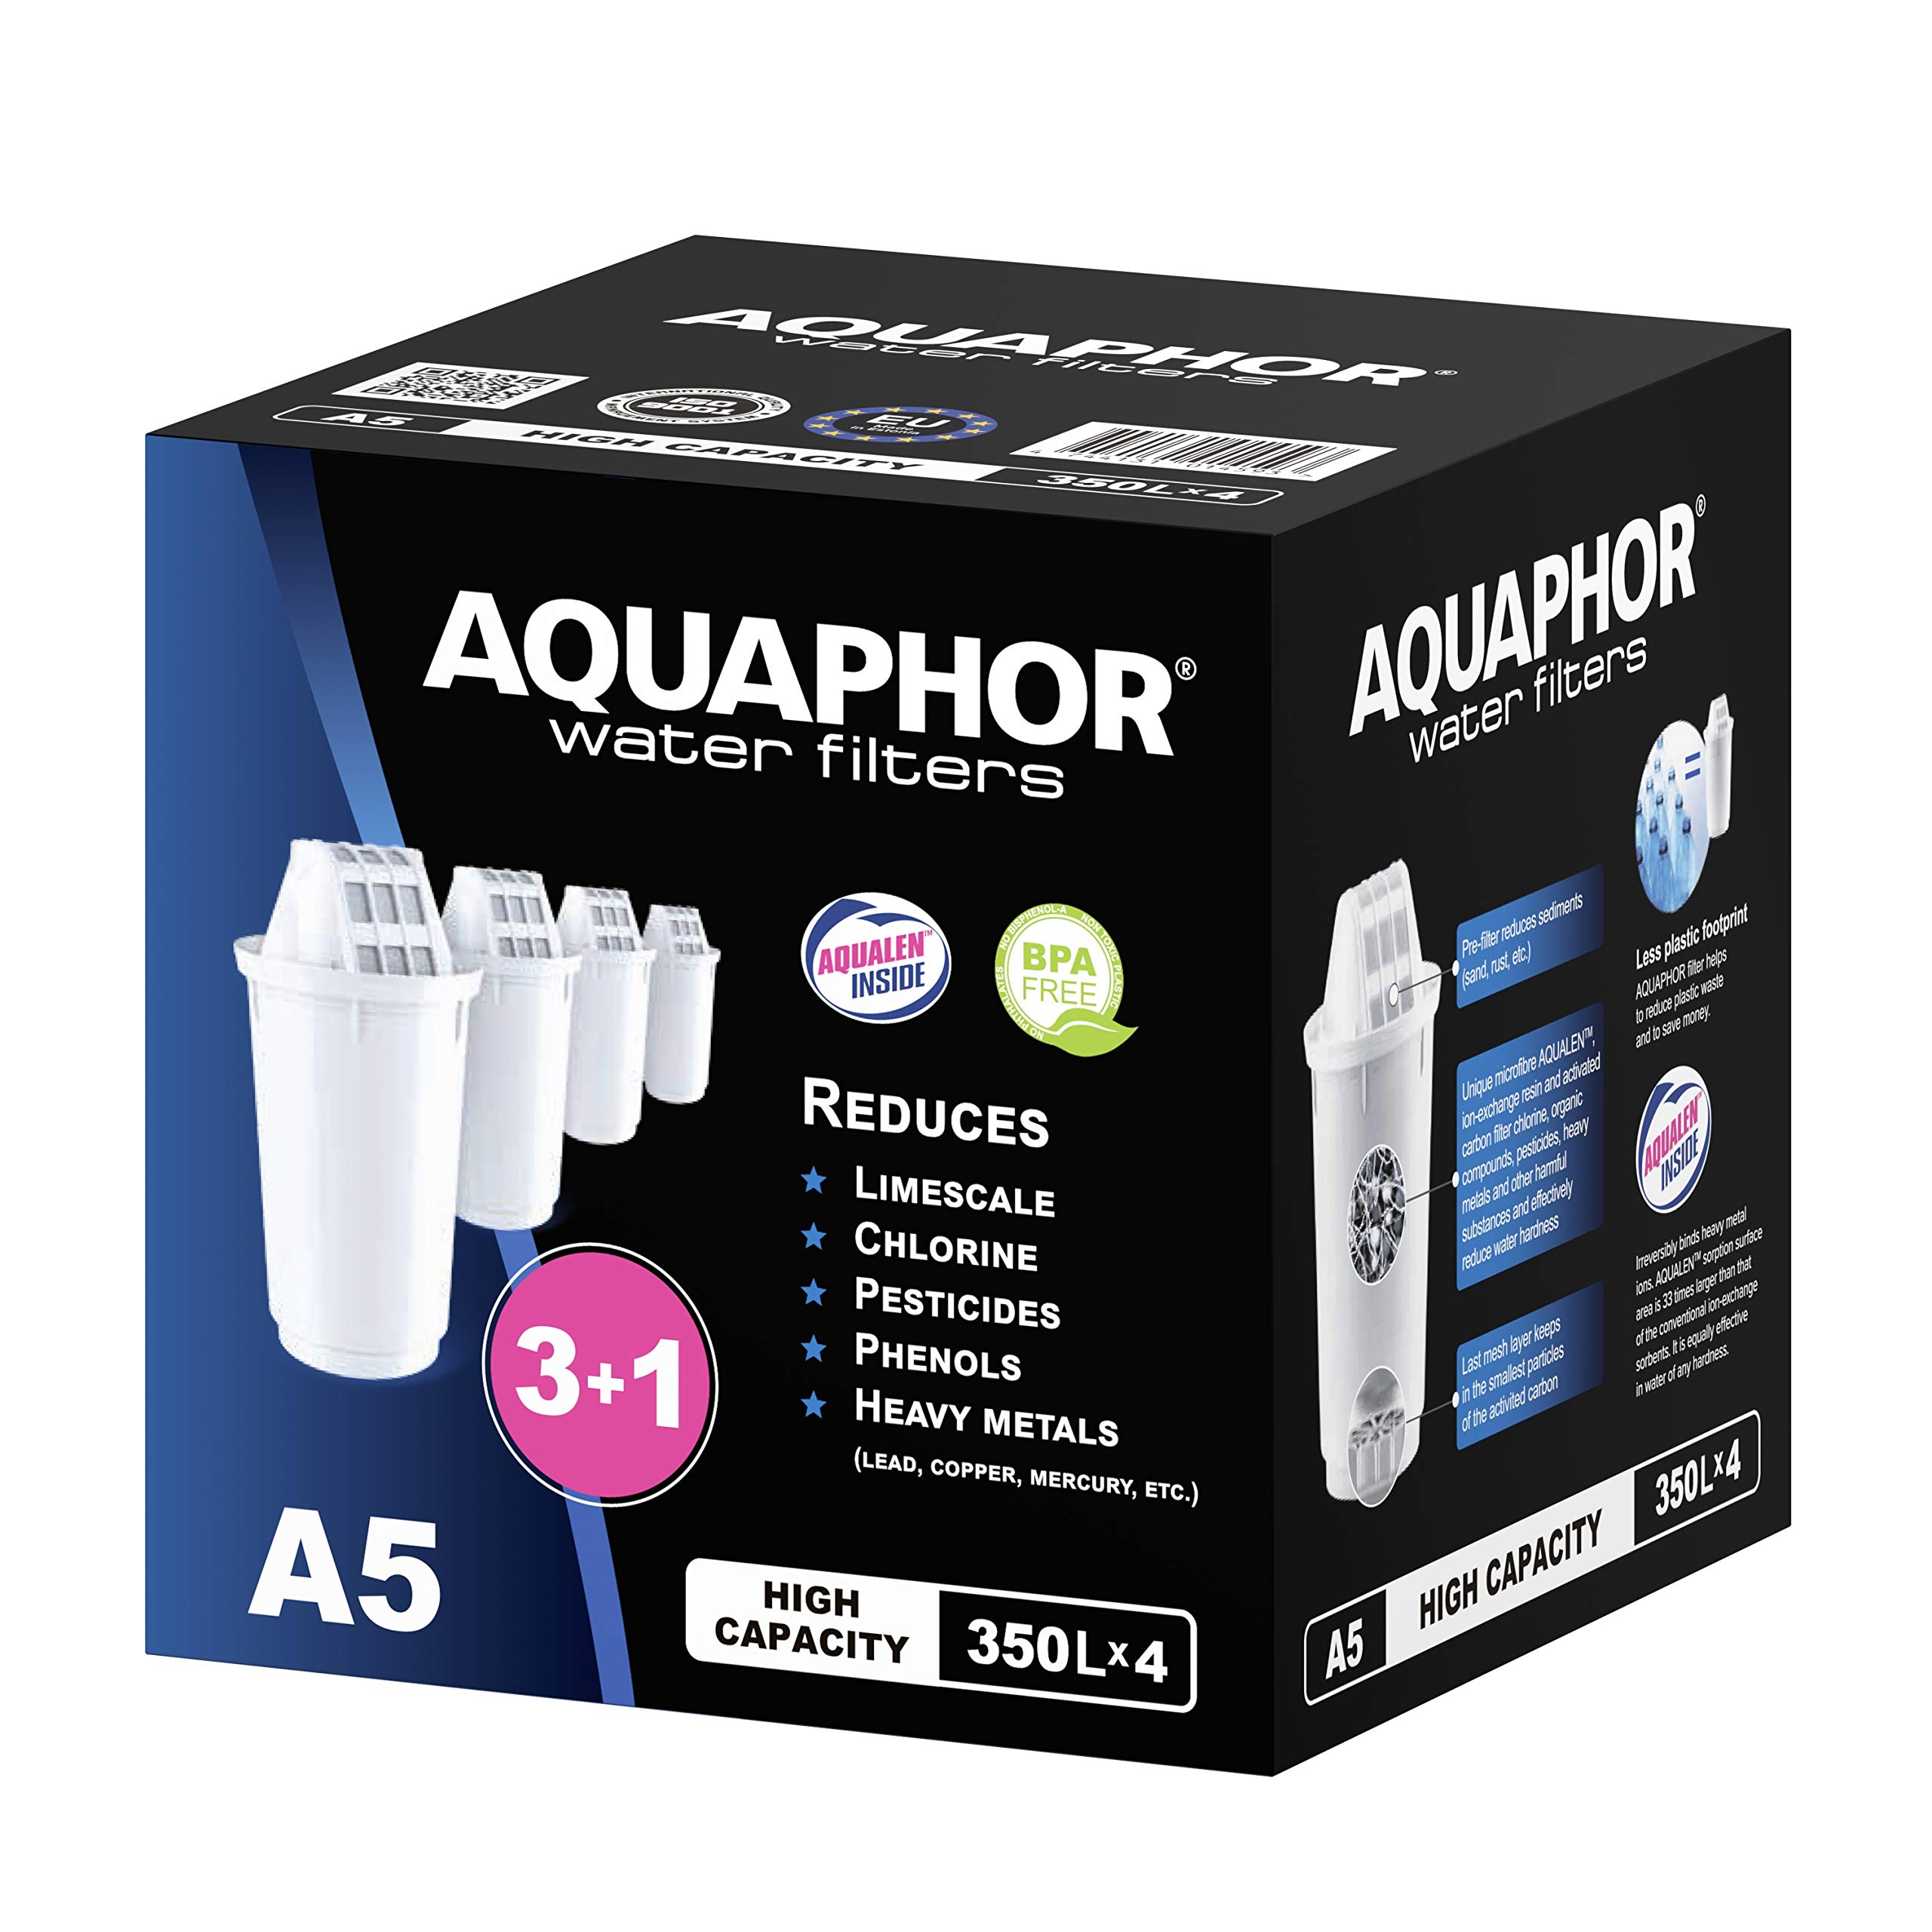 AQUAPHOR A5 Water Filter Cartridge, 4 Count (Pack of 1), White